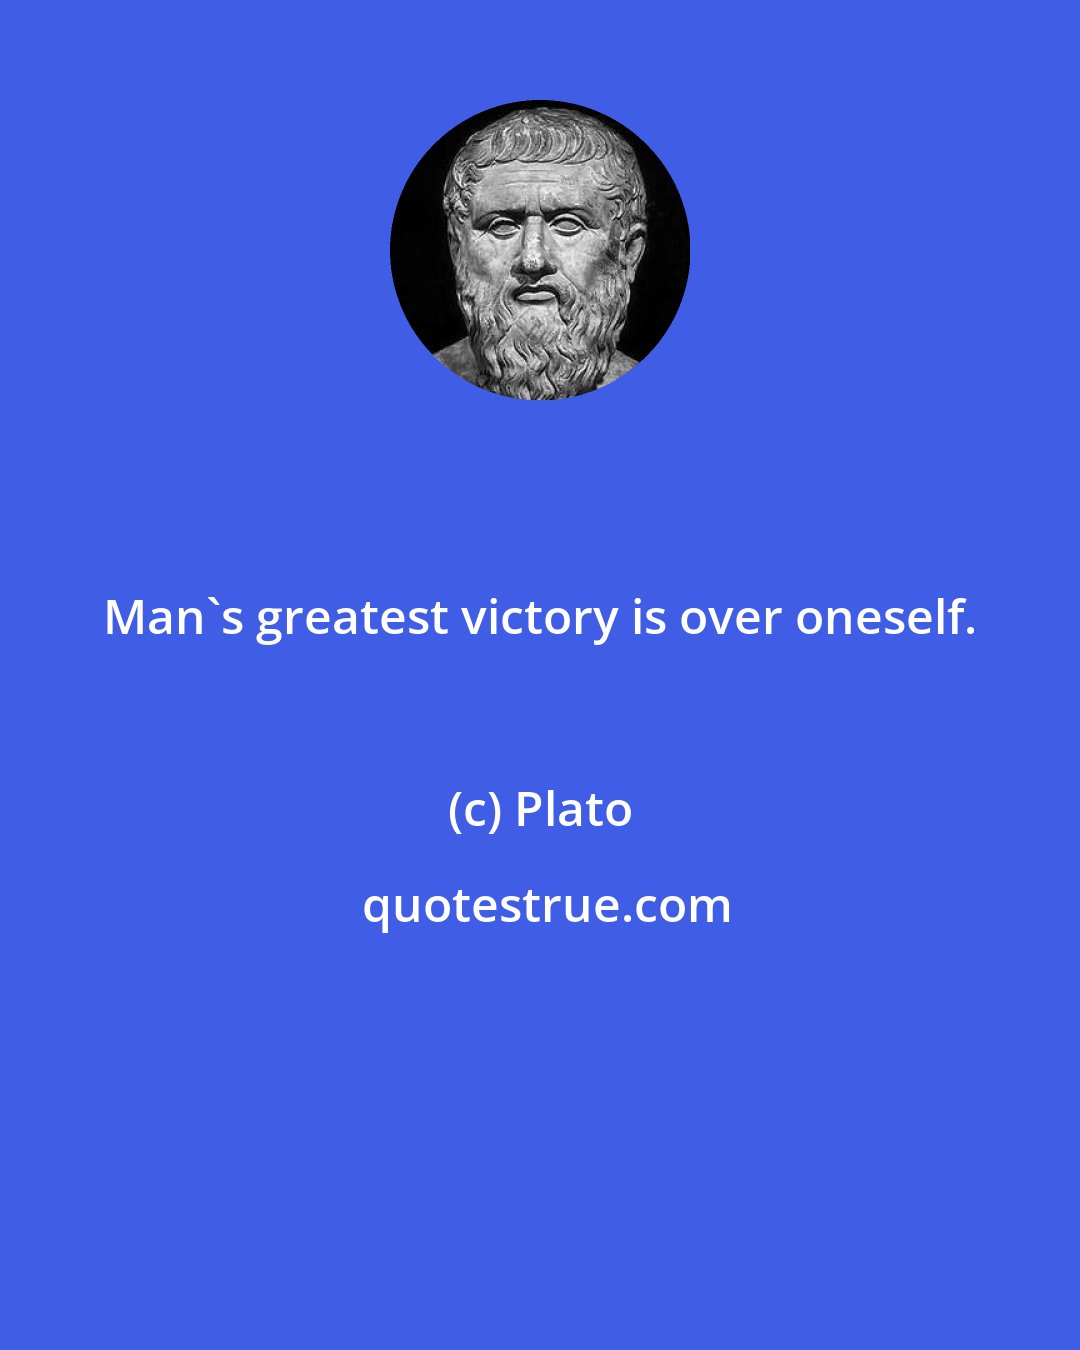 Plato: Man's greatest victory is over oneself.